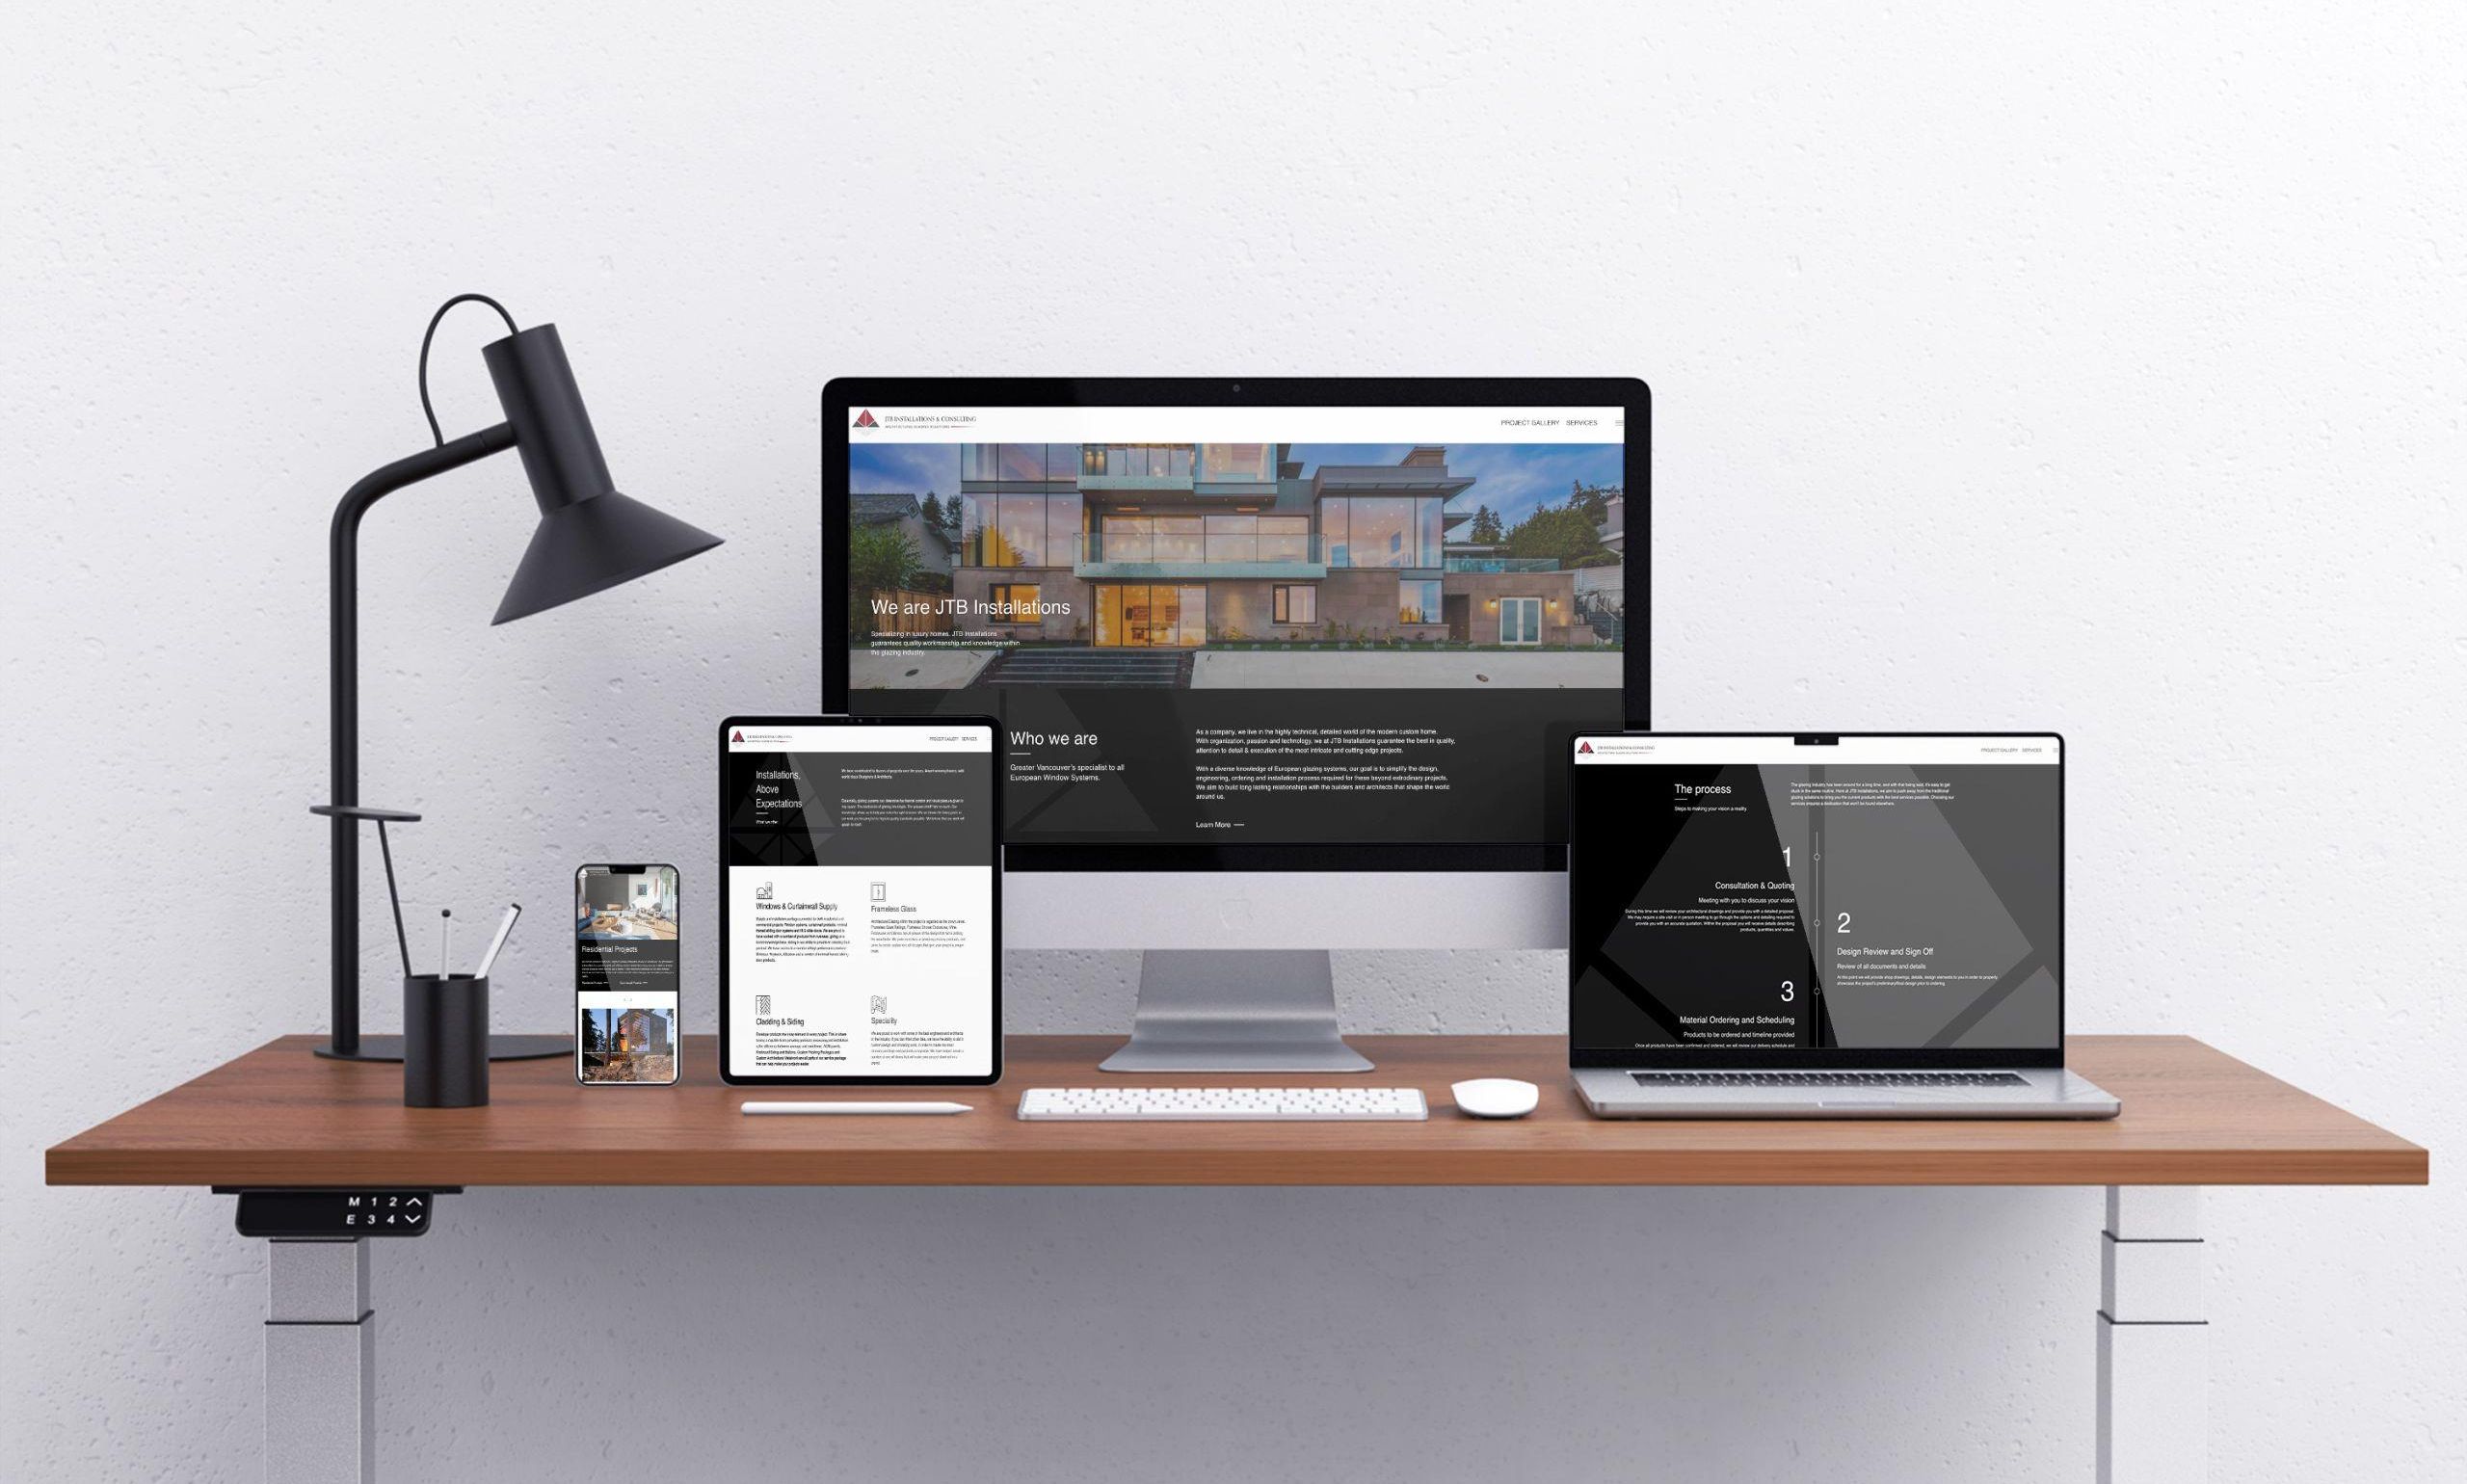 Mockups of JTB Installations' website displayed on multiple devices.